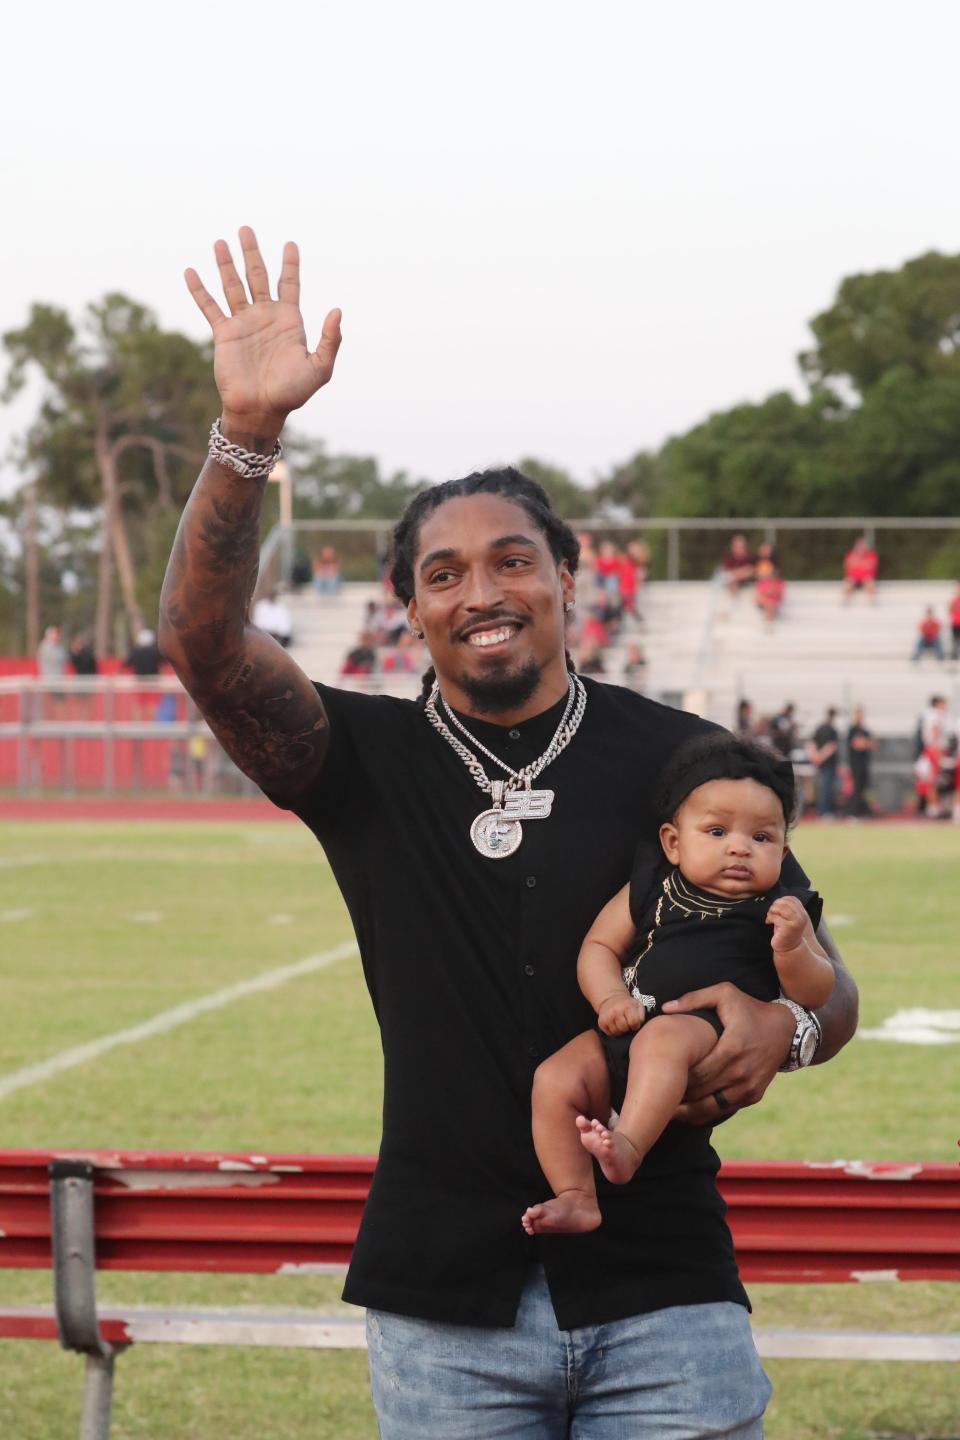 North Fort Myers High alum Tre Boston had his jersey retired during a halftime celebration in May 2021.